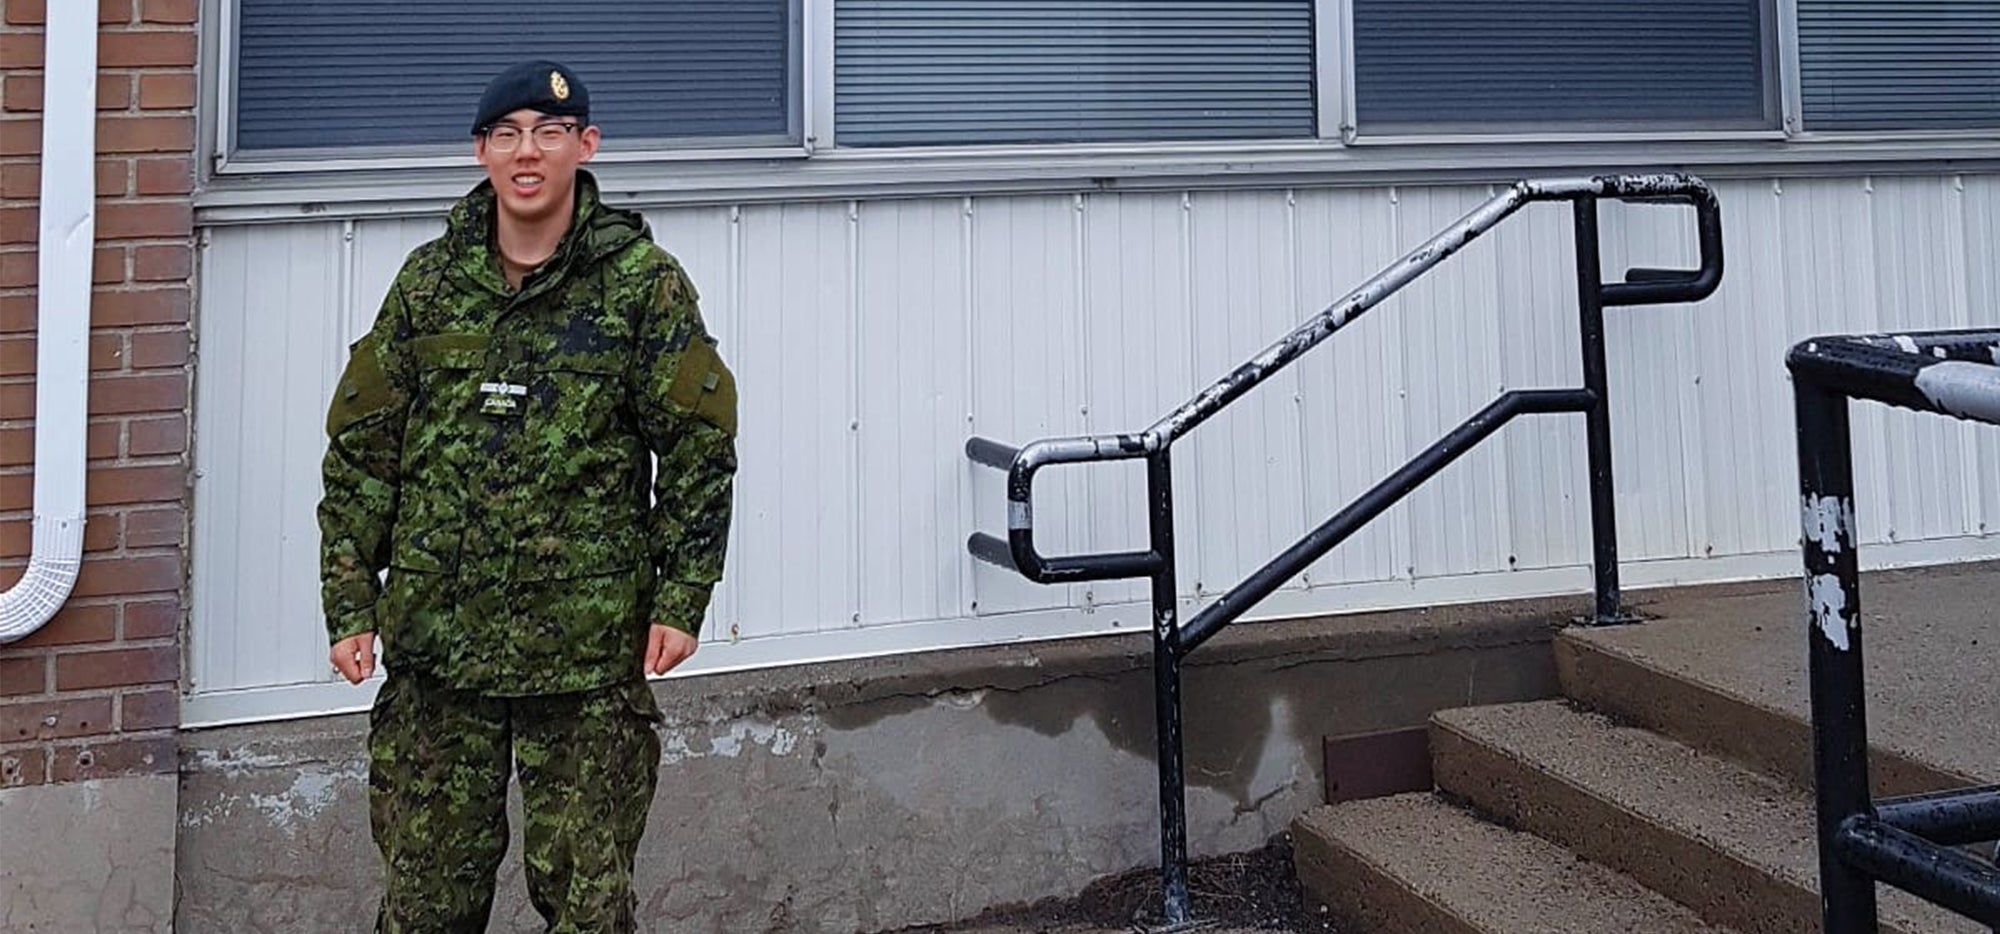 Sean standing outside the medical clinic in military attire